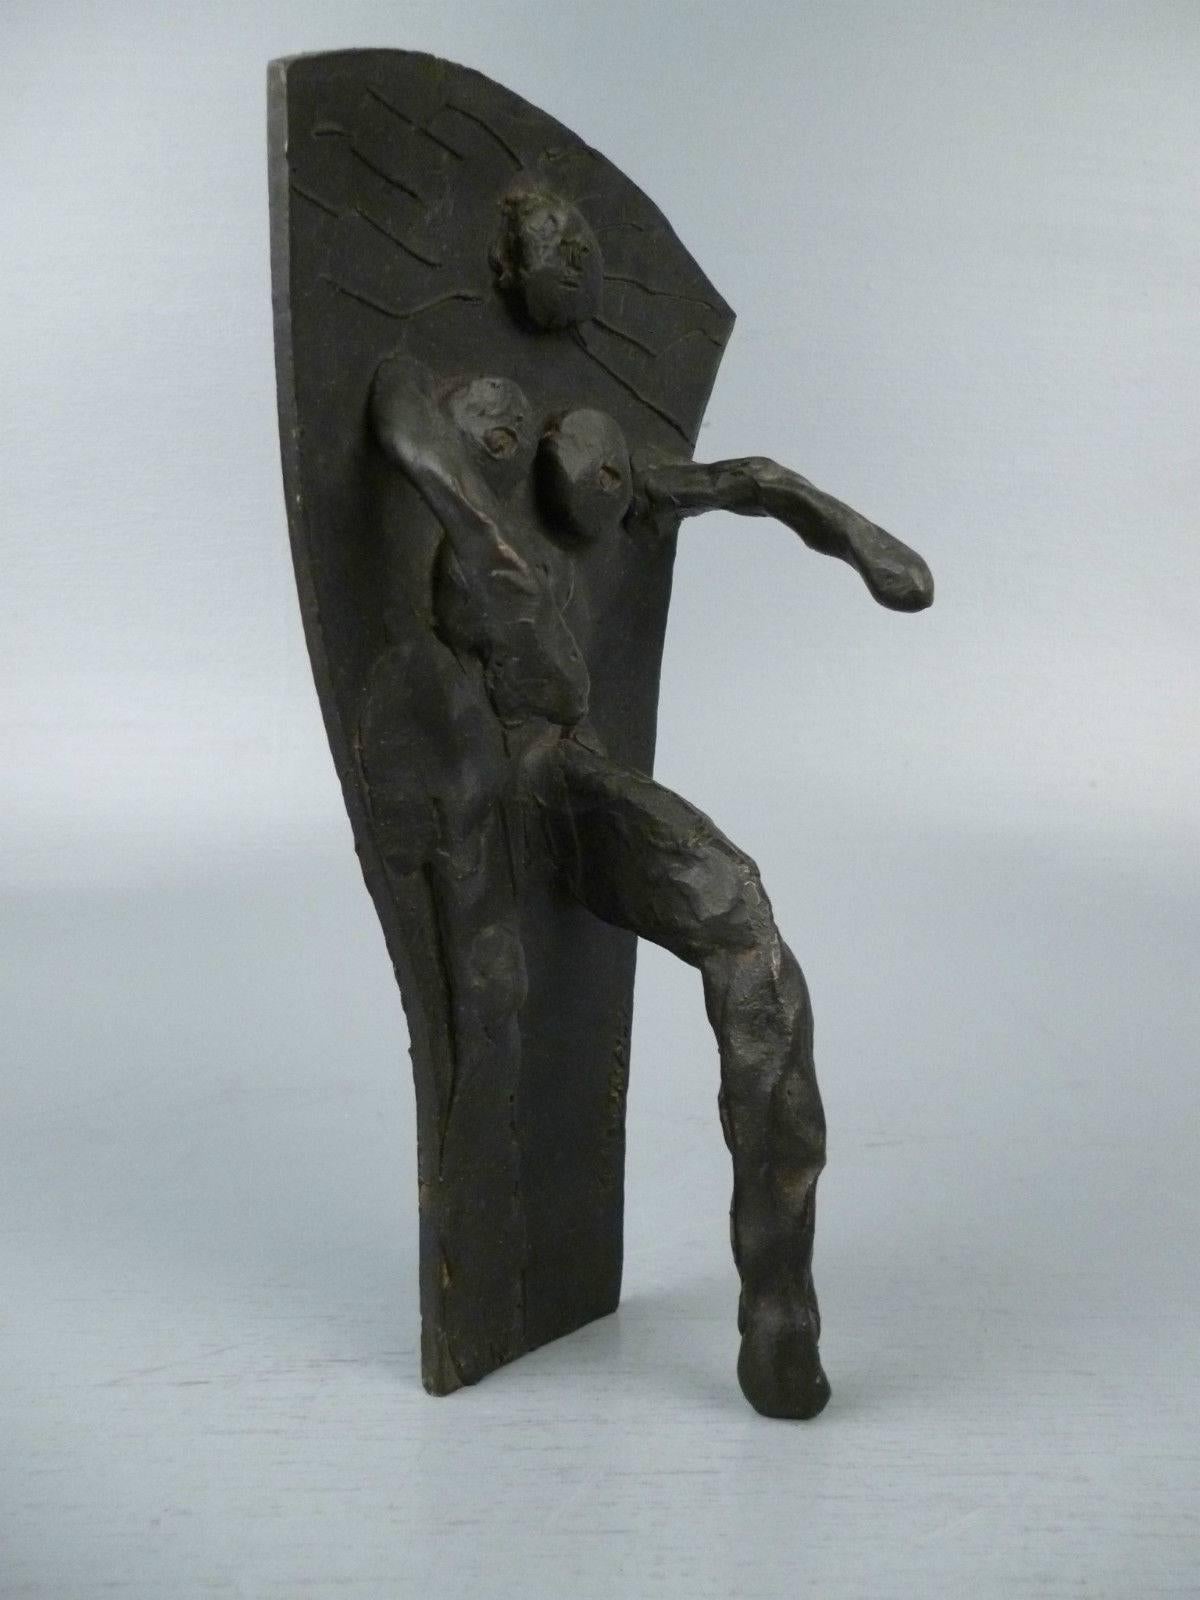 God - a small bronze sculpture by Abbott Lawrence Pattison. A strong feminist depiction of God as woman.

It depicts a nude female partial figure emerging from a flat surface. (When the bronze is on a table top, she looks to be swimming